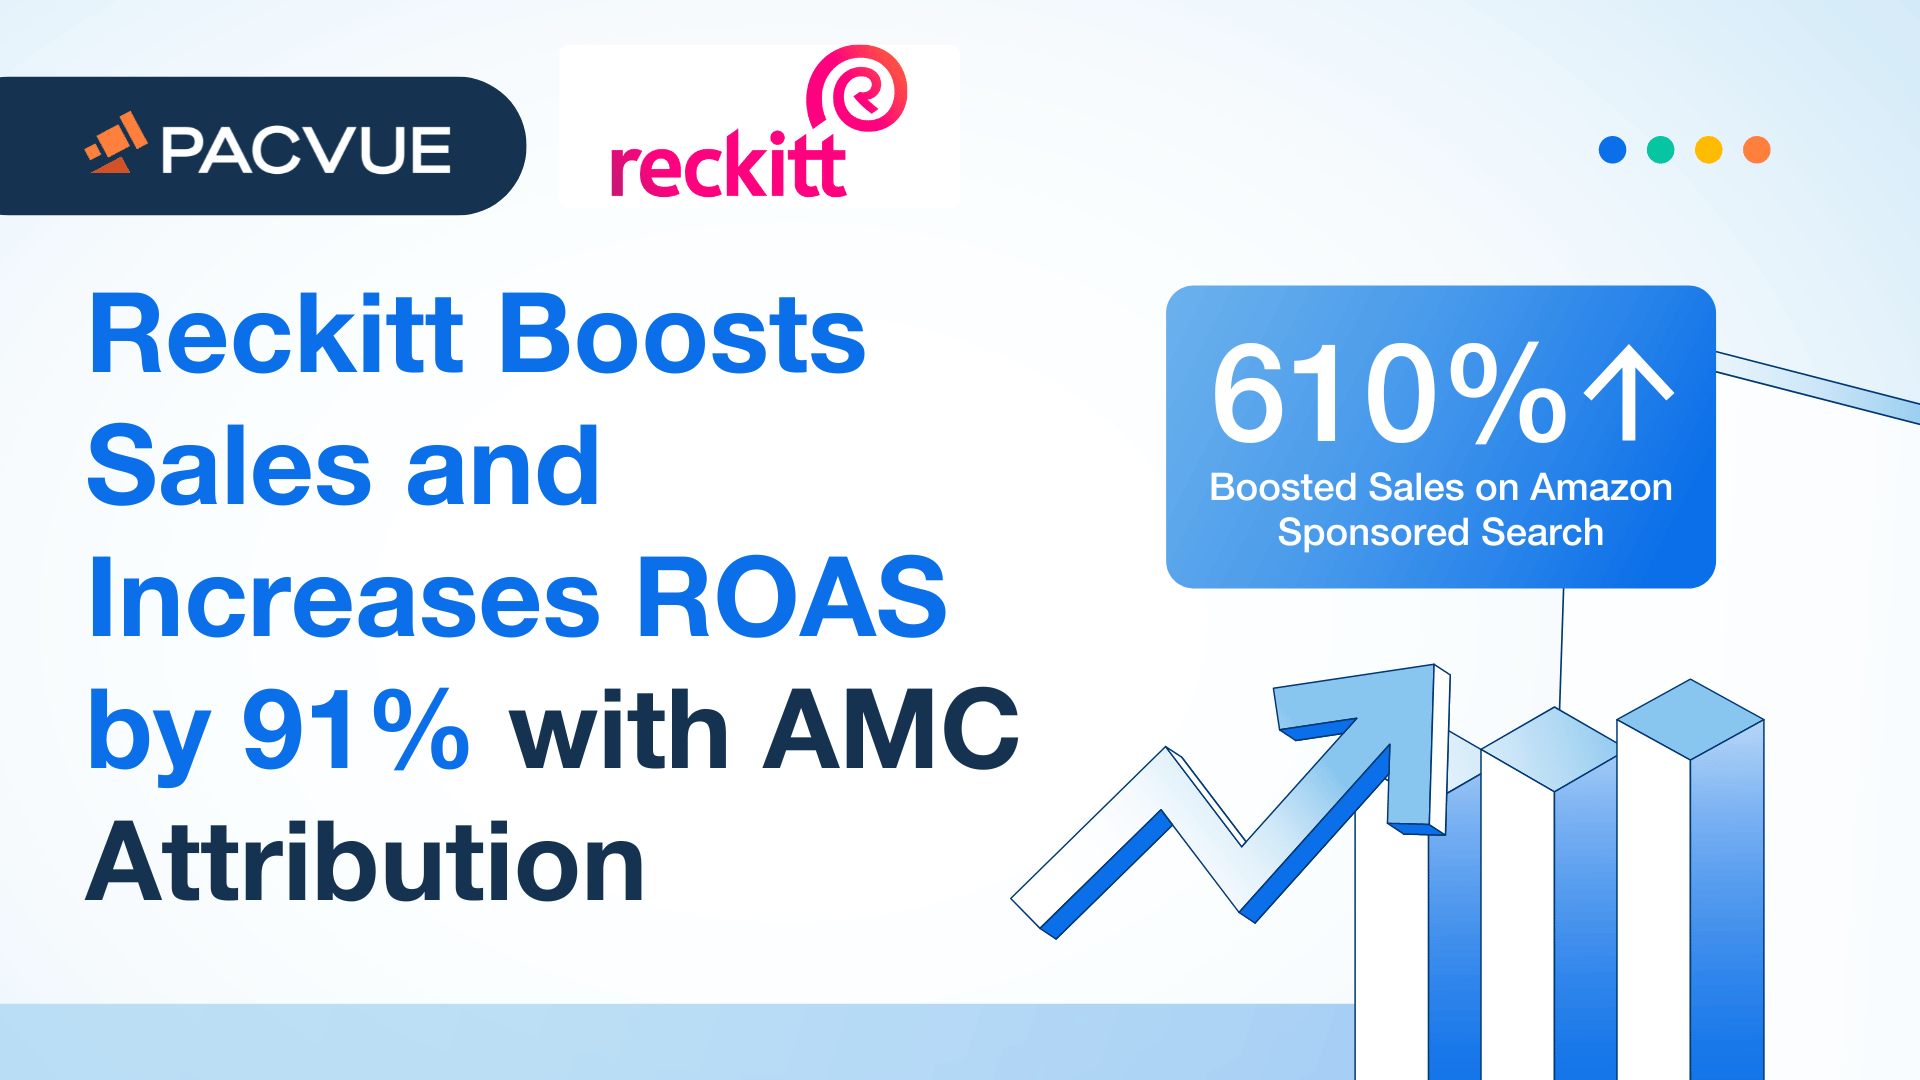 Reckitt Boosts Sales and Increases ROAS by 91% with AMC Attribution